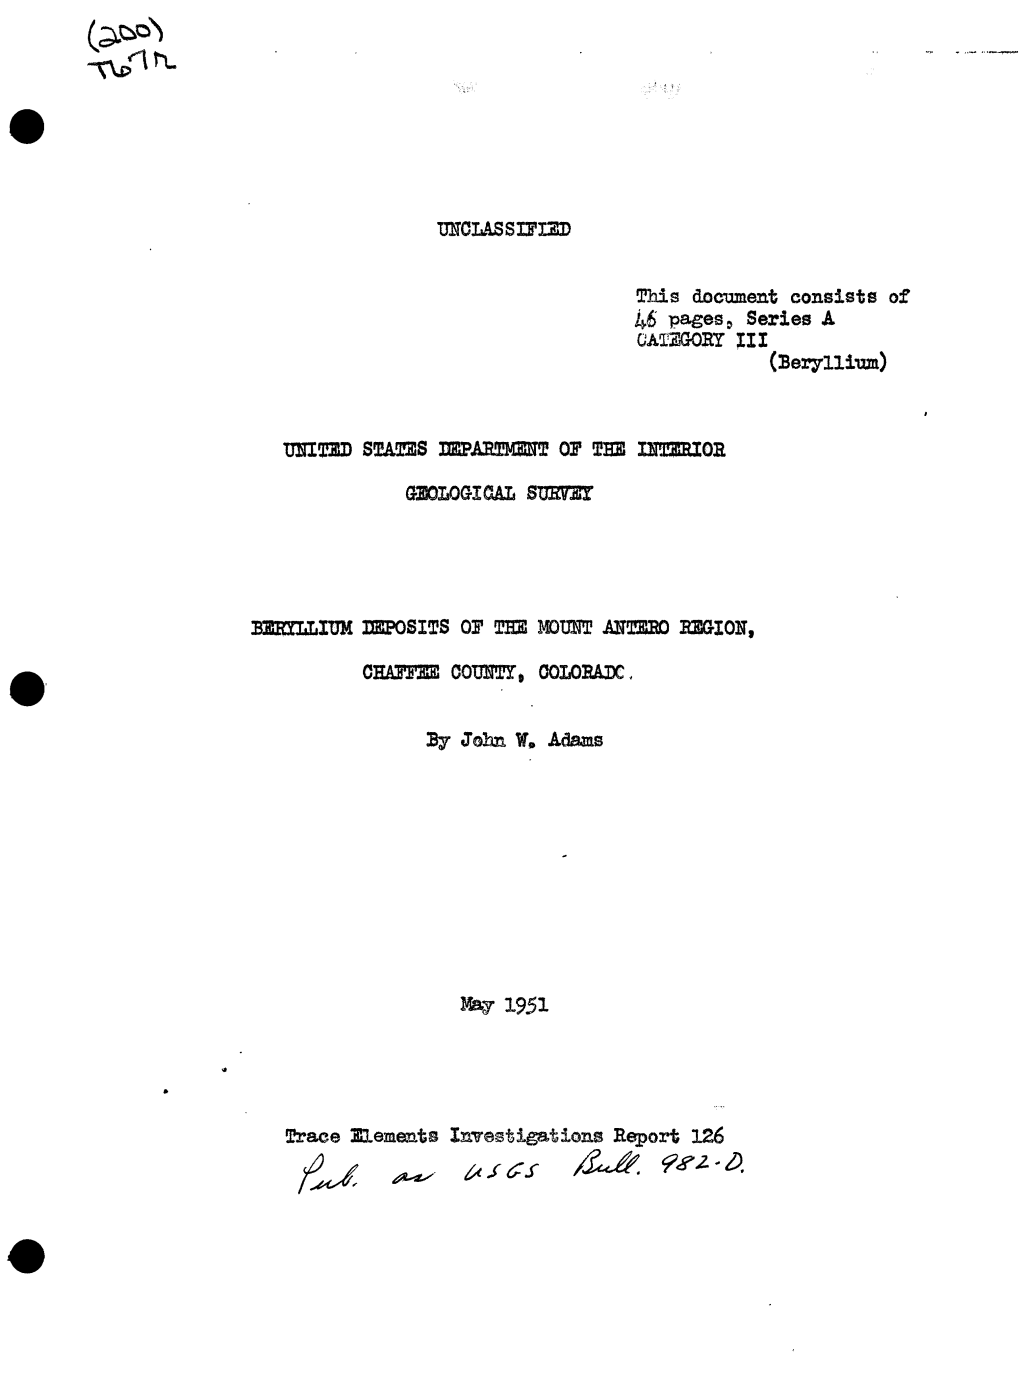 This Document Consists of 46 Pages5 Series a OAESGOEY III UHITSD